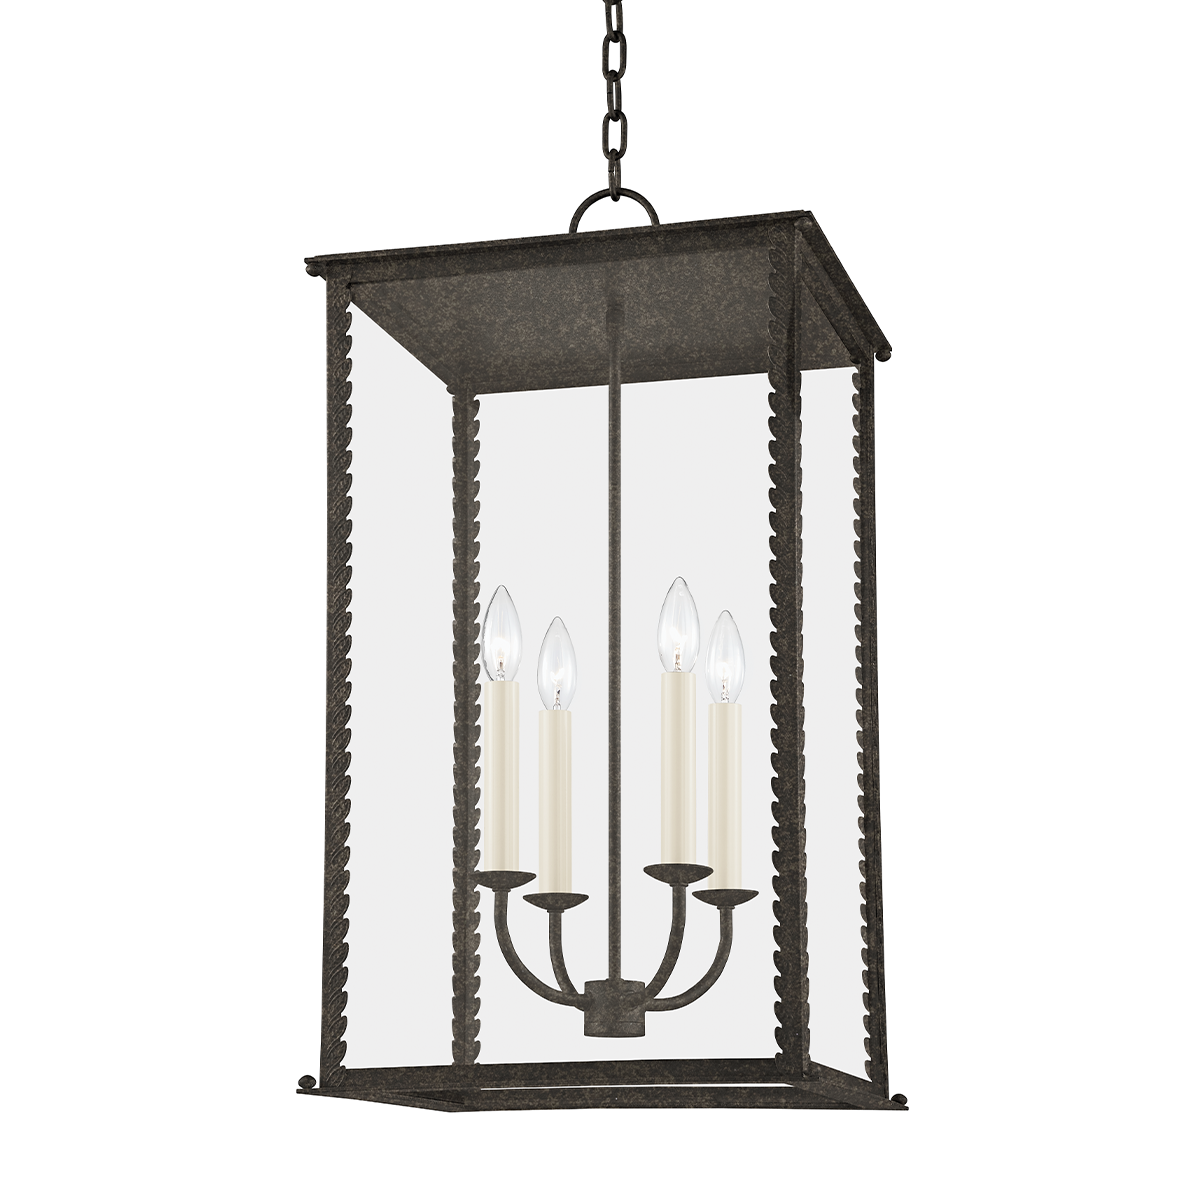 Troy Lighting 4 LIGHT LARGE EXTERIOR LANTERN F6715 Outdoor l Wall Troy Lighting FRENCH IRON  